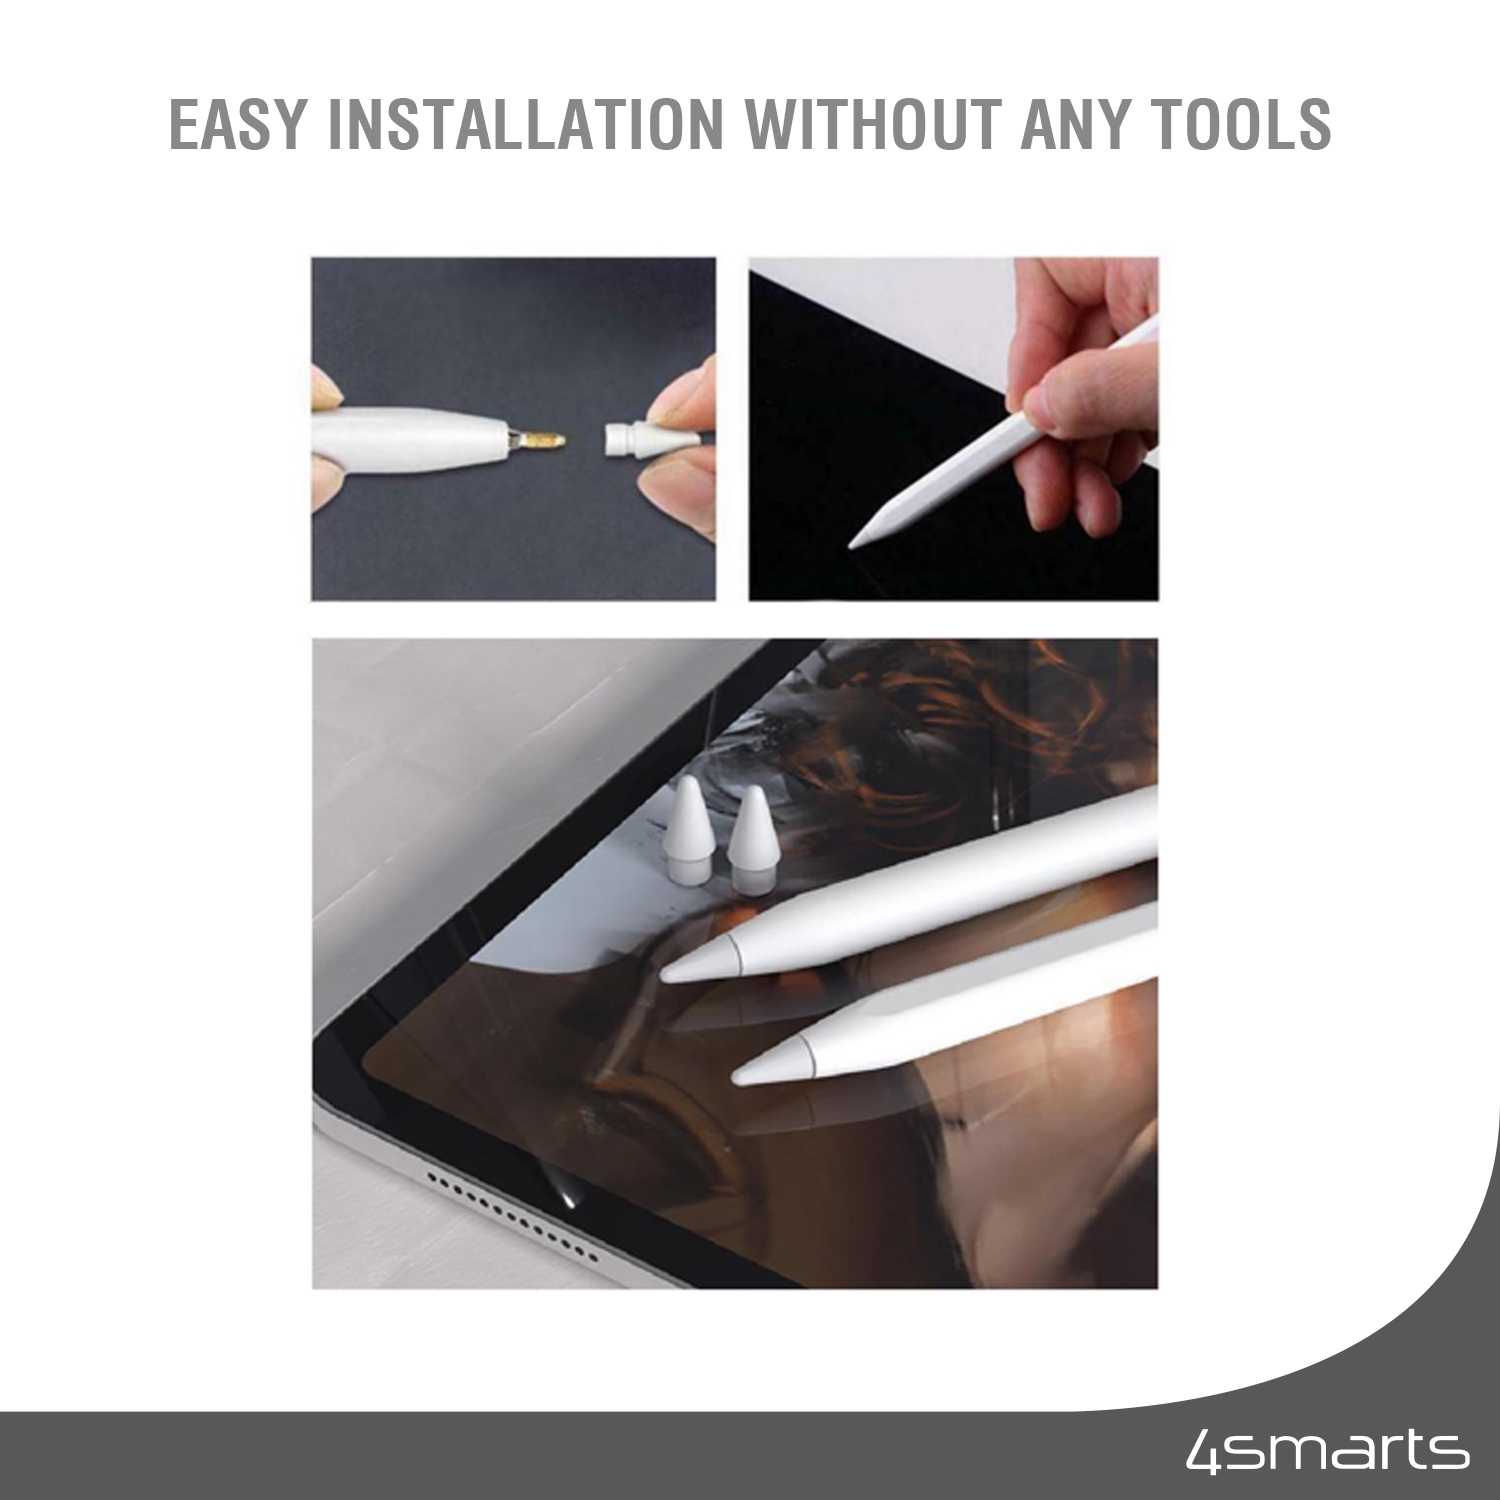 The 4smarts Tip Replacement Set of 4 allows for very easy installation without any tools.